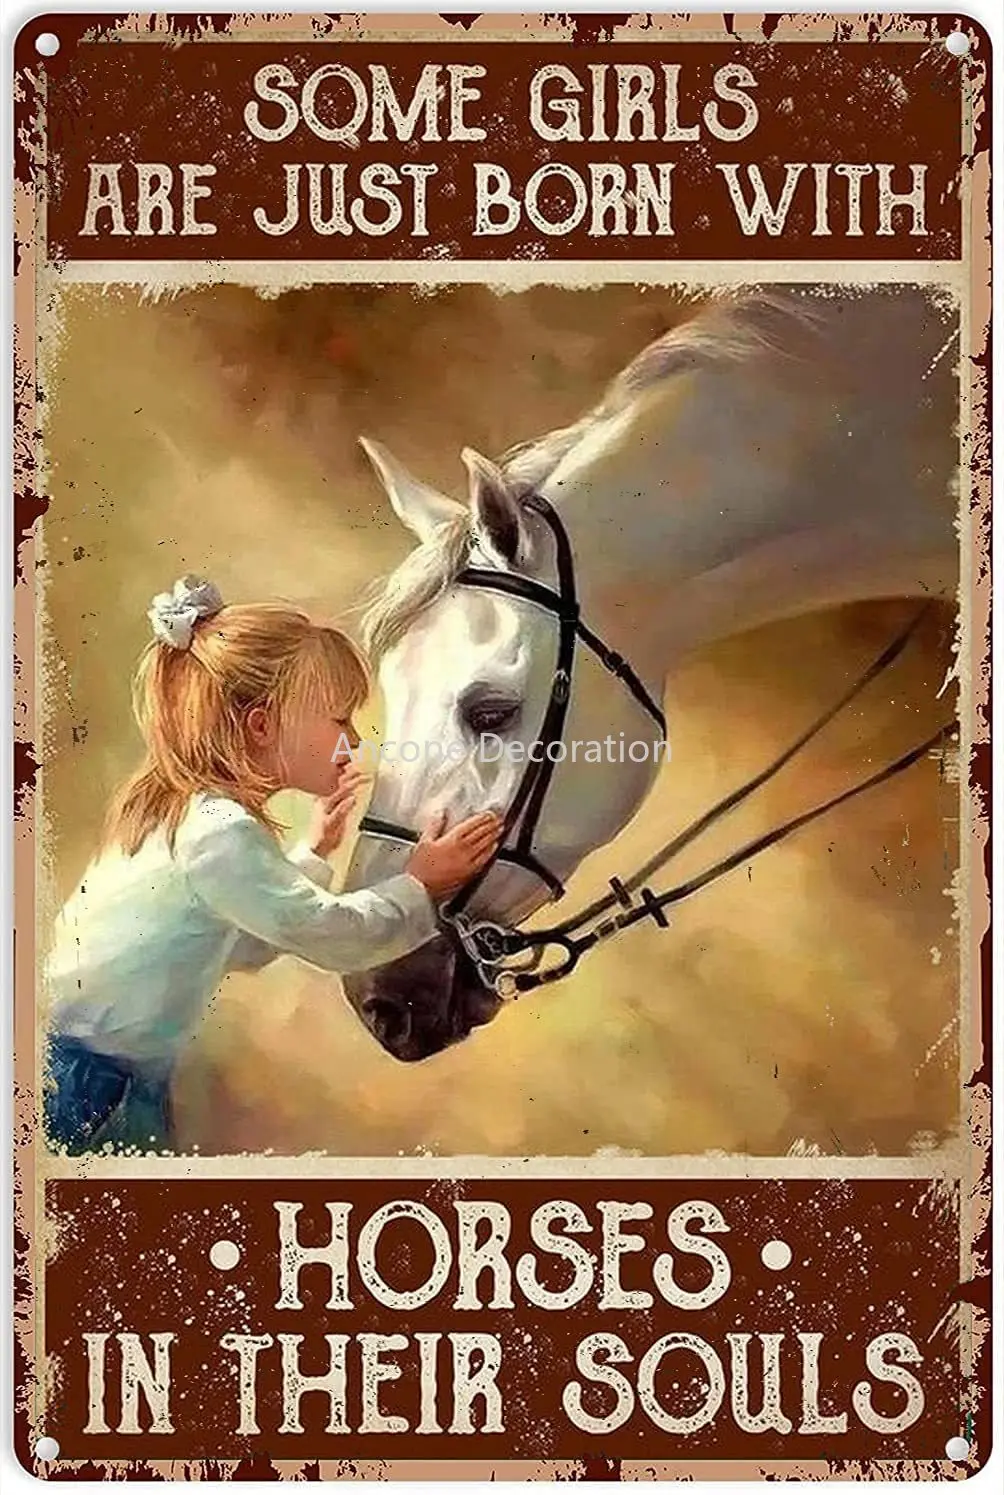 

Horse and Girl Poster Metal Tin Sign, Some Girls are Born to Like Horse Chic Retro Art Interesting Garage Home Cafe Kitchen